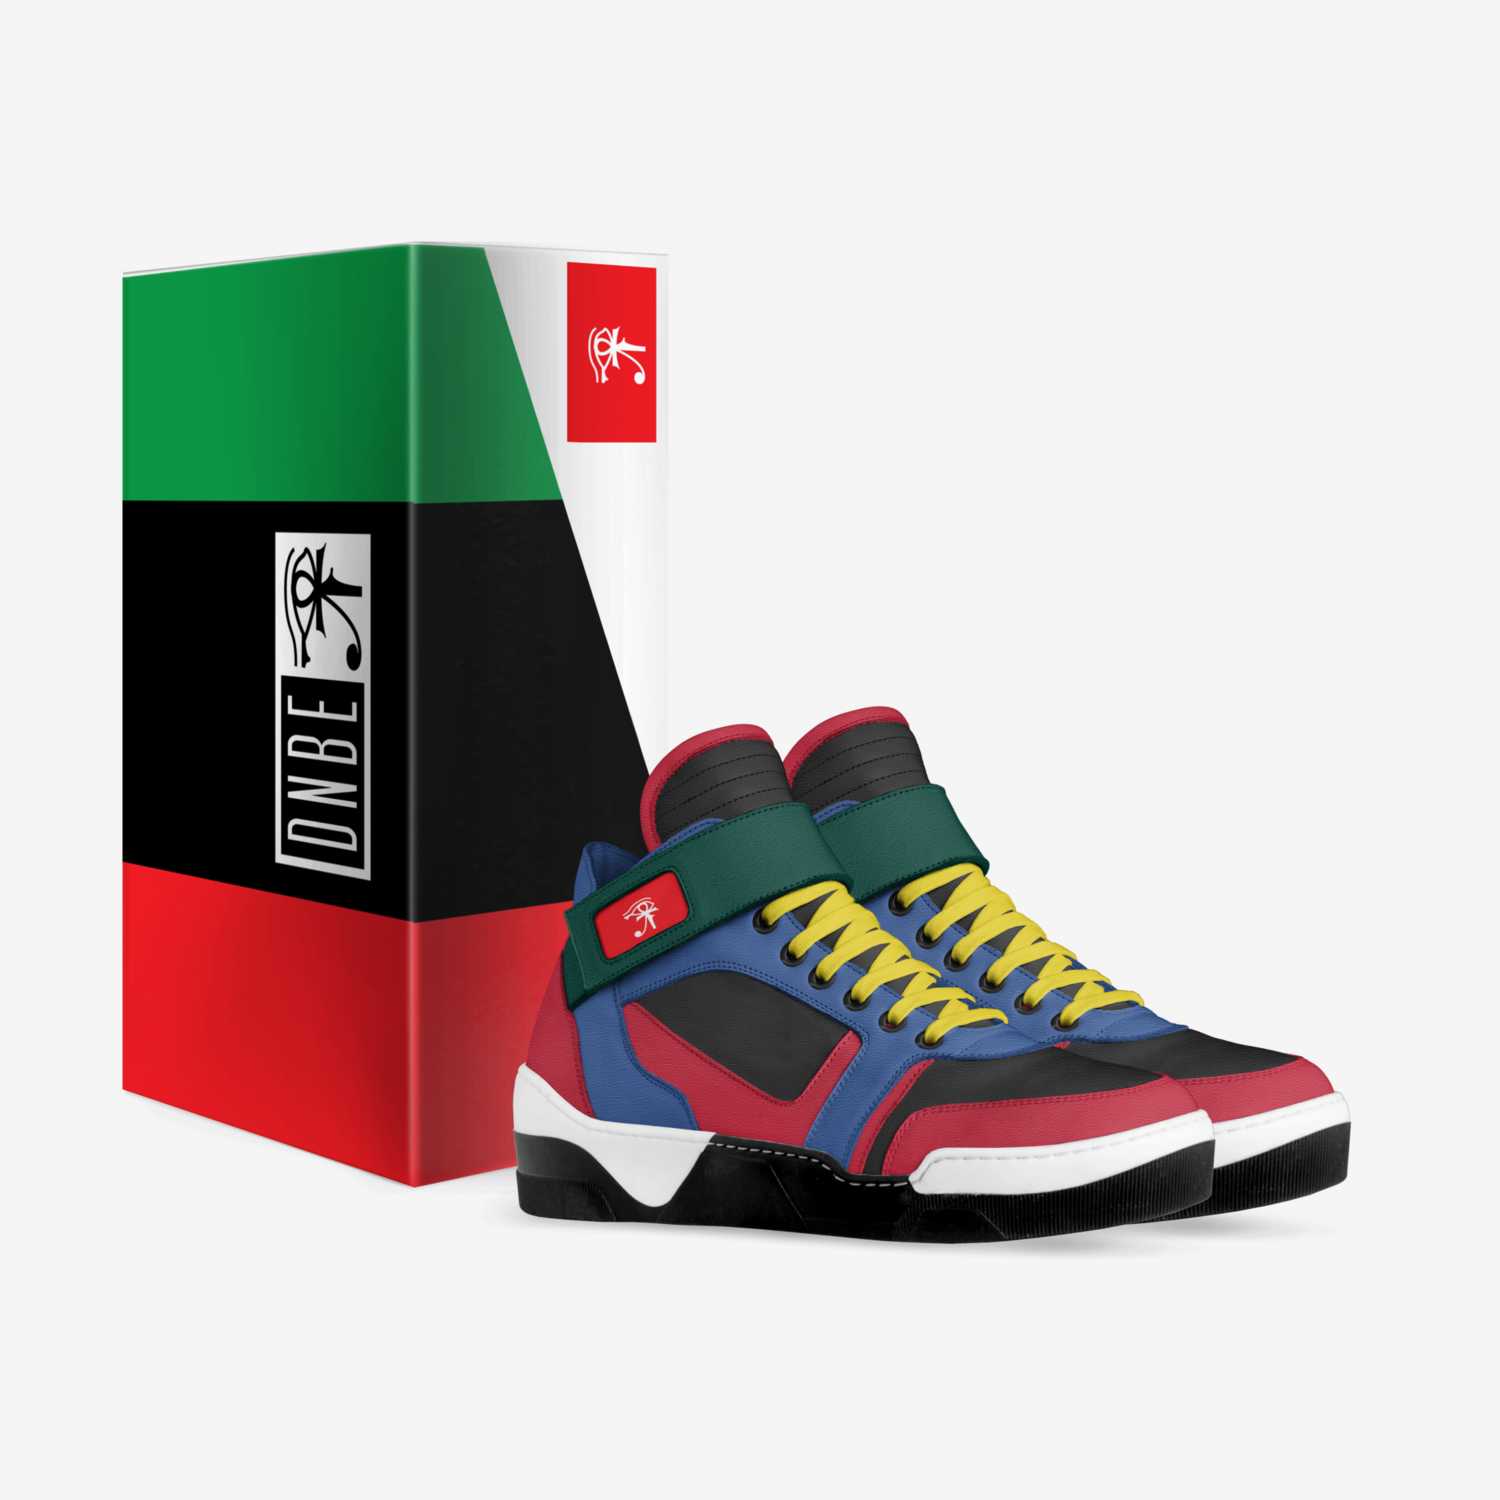 Ayiti custom made in Italy shoes by Dnbe Apparel | Box view